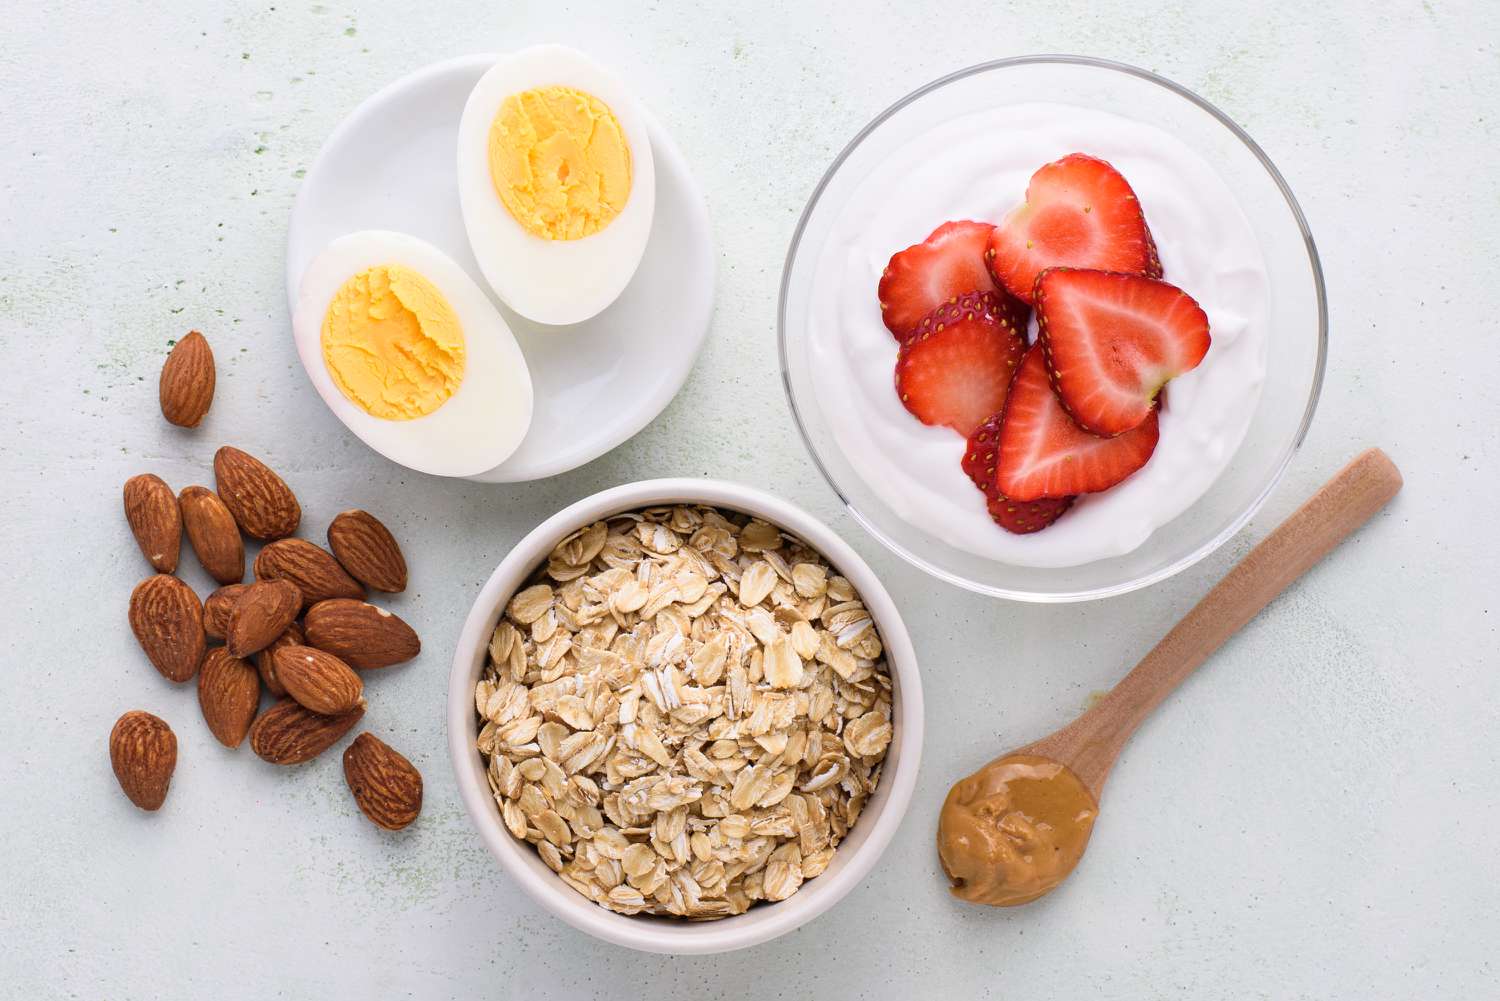 foods to eat before a run including oatmeal, peanut butter, almonds, hard-boiled eggs, and yogurt with fruit